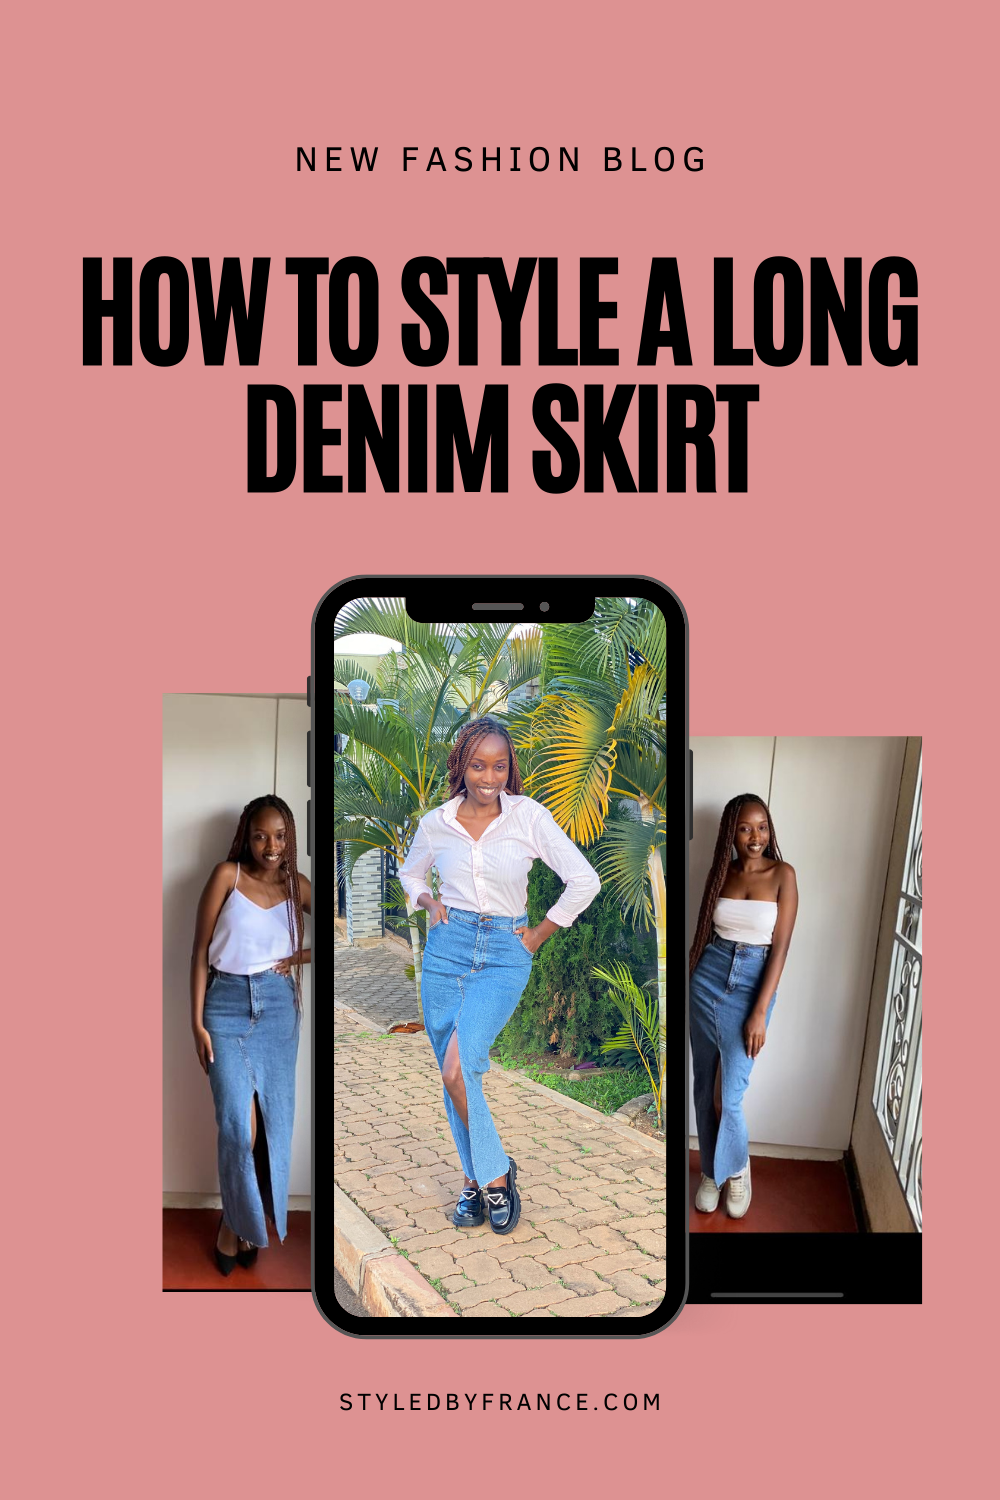 How style a long denim skirt - Styled By France